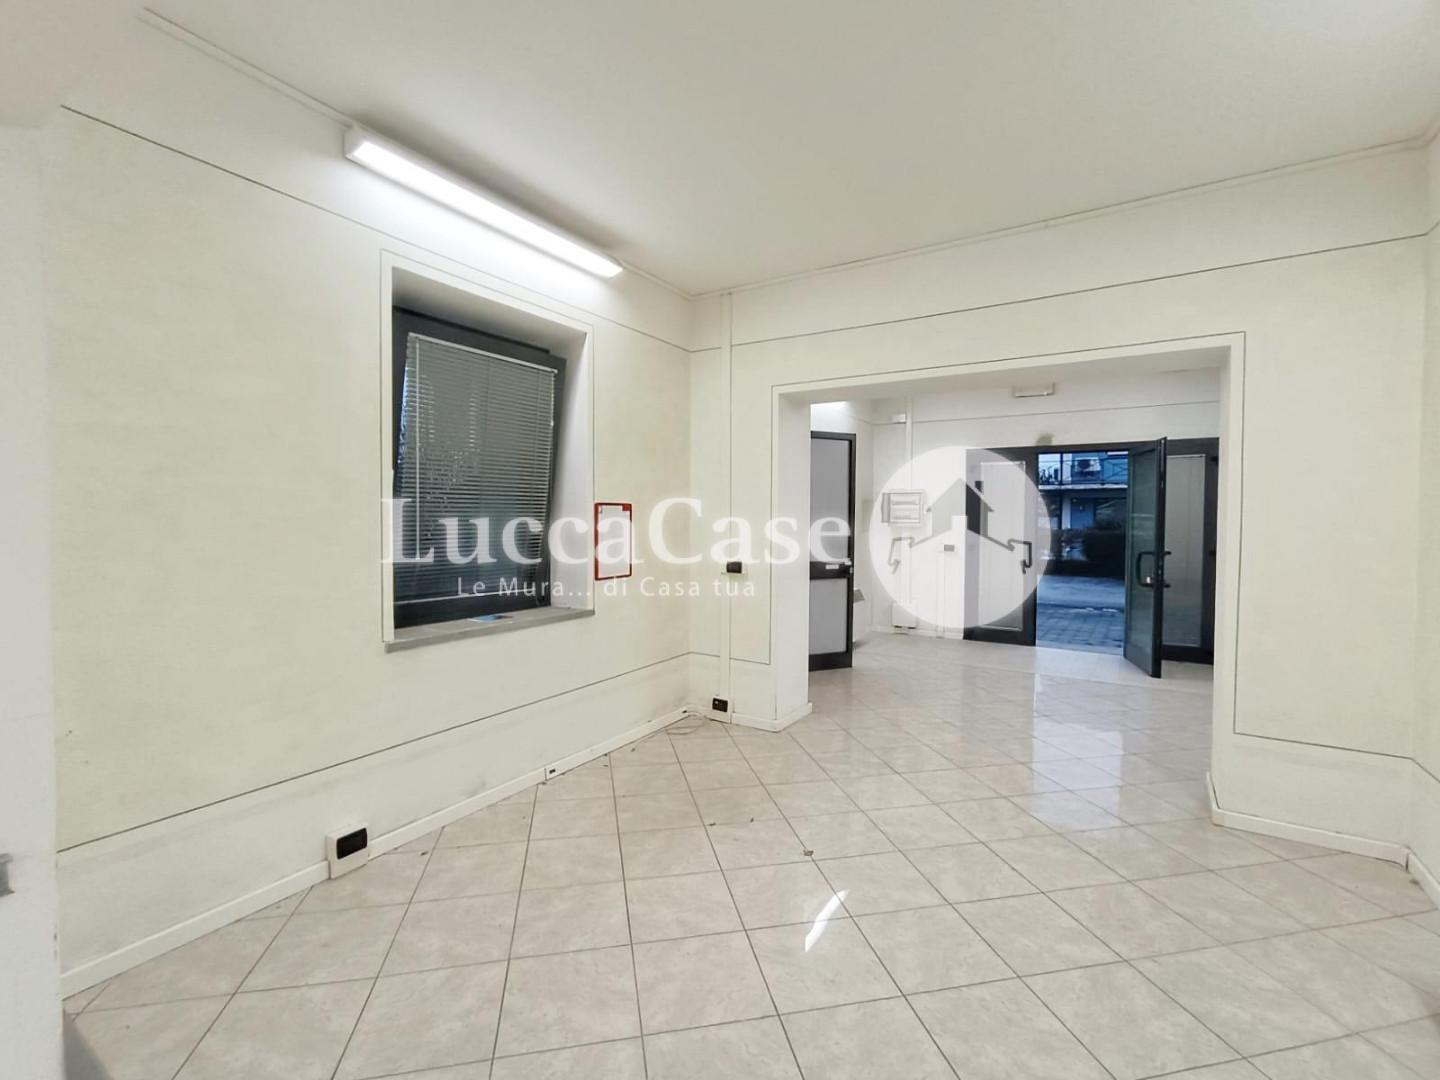 Office for commercial rentals in Barga (LU)